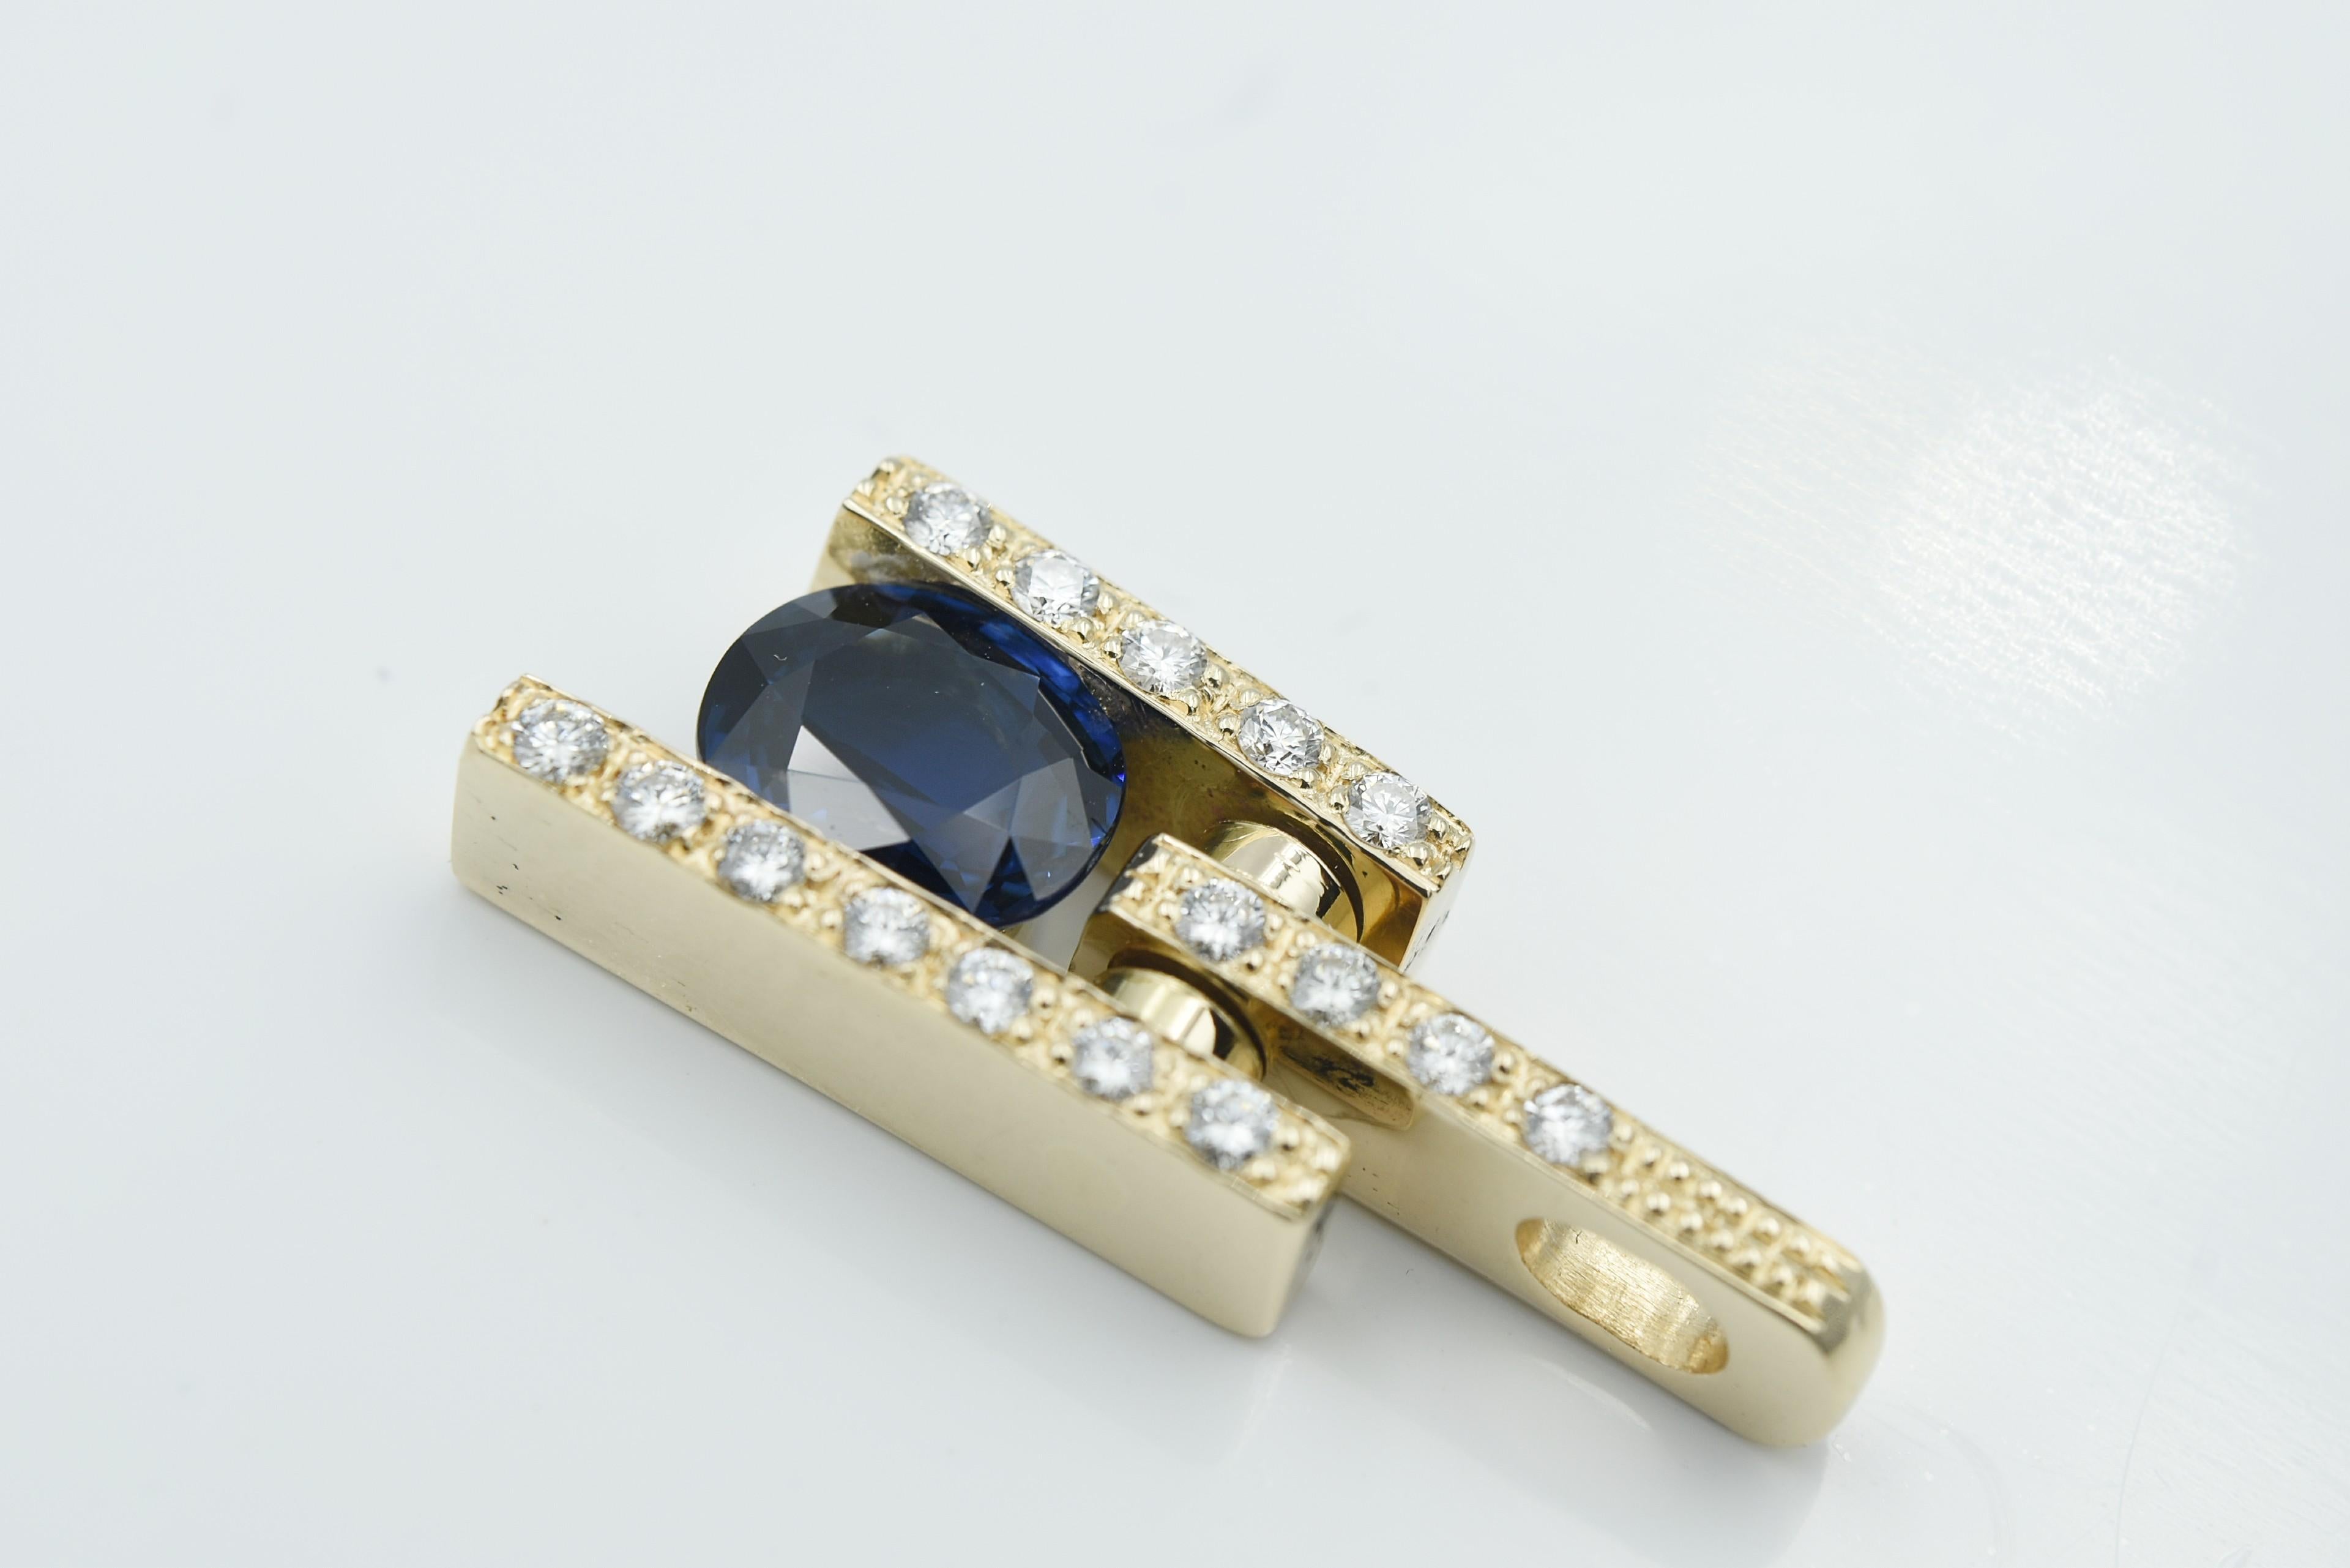 14k Yellow Gold Blue Sapphire and Diamond Hinge Bale Pendant. The oval sapphire measures 7.5 x 6 mm and is channel set between two diamond walls and hanging from a diamond hinge bale.  Sapphire weight is 1.40ct and diamonds are .40ct. H color SI1